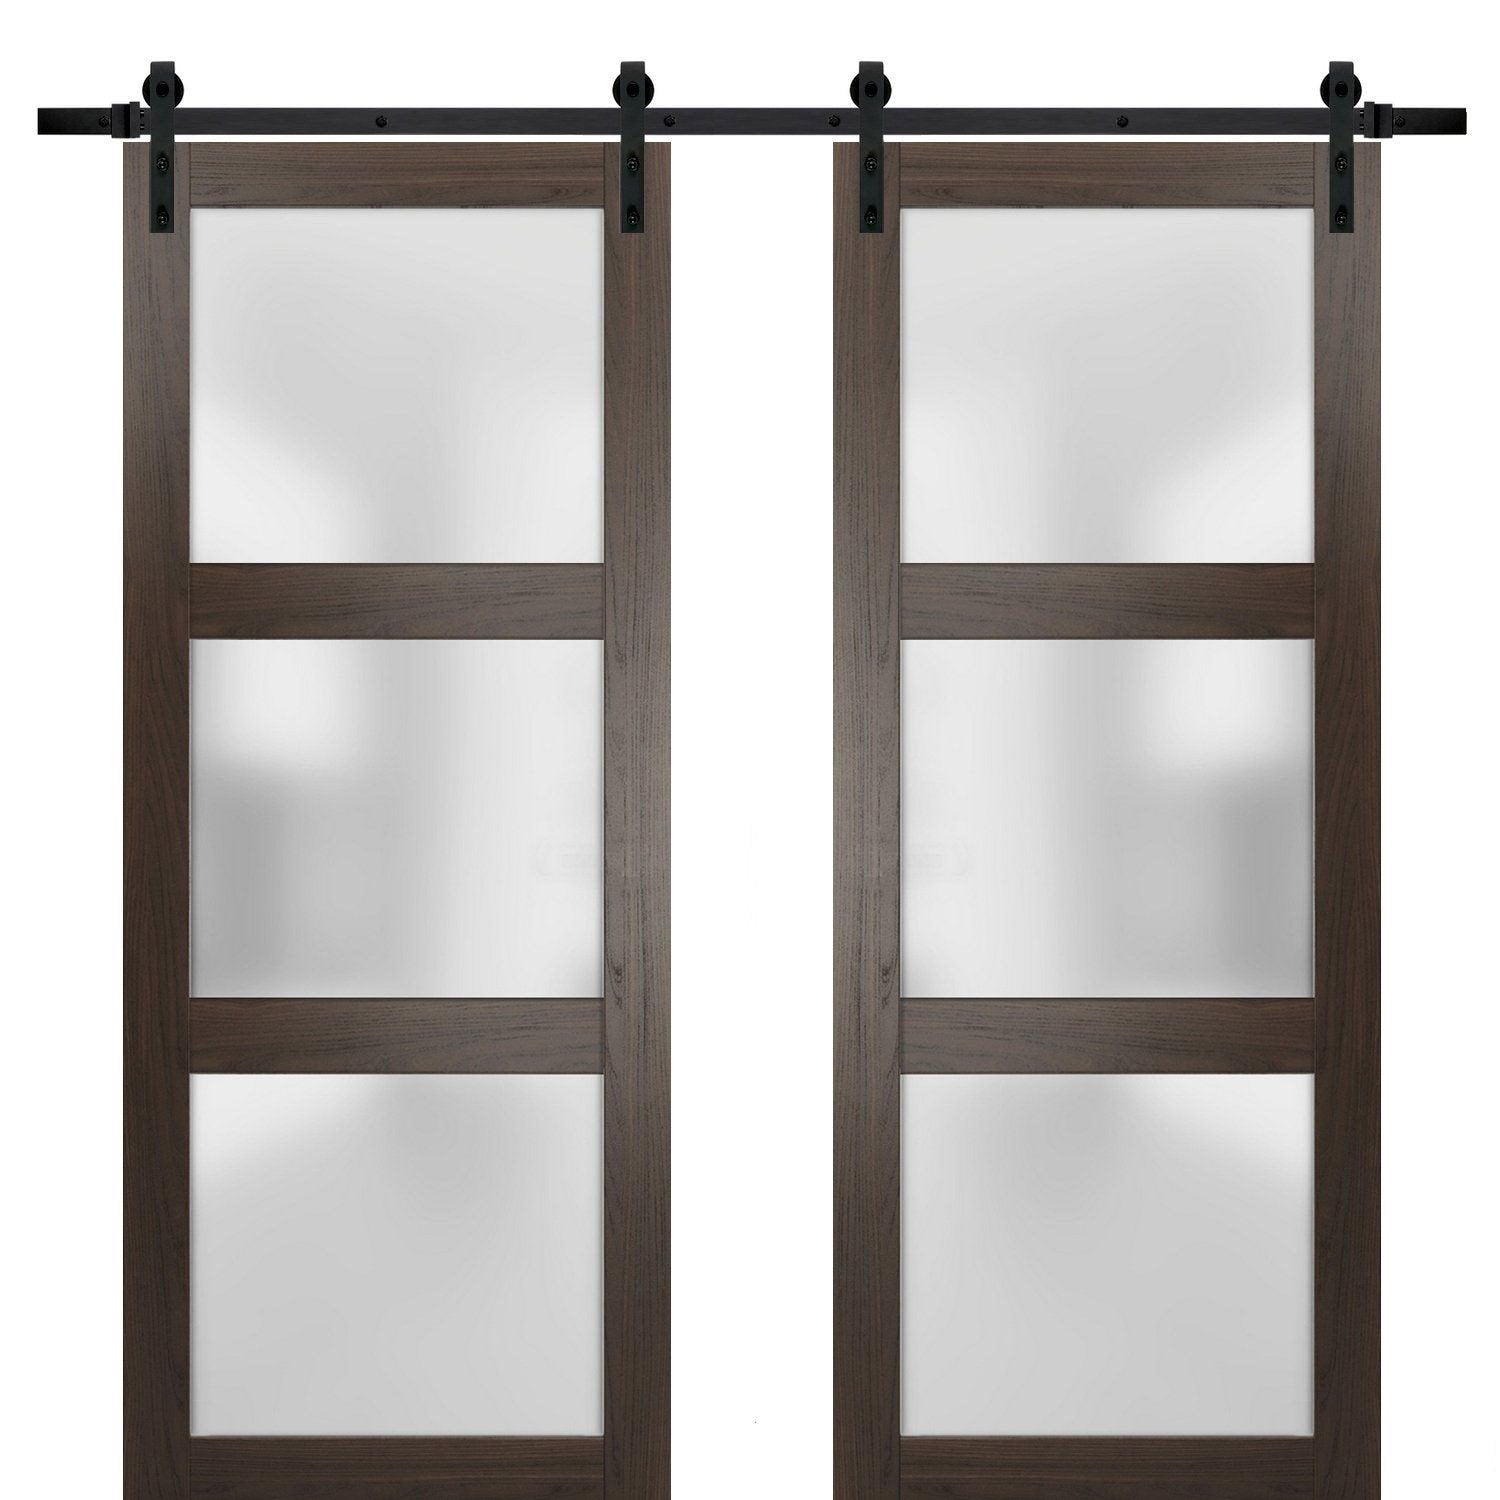 Lucia 2552 Chocolate Ash Double Barn Door with Frosted Glass | Black Rail